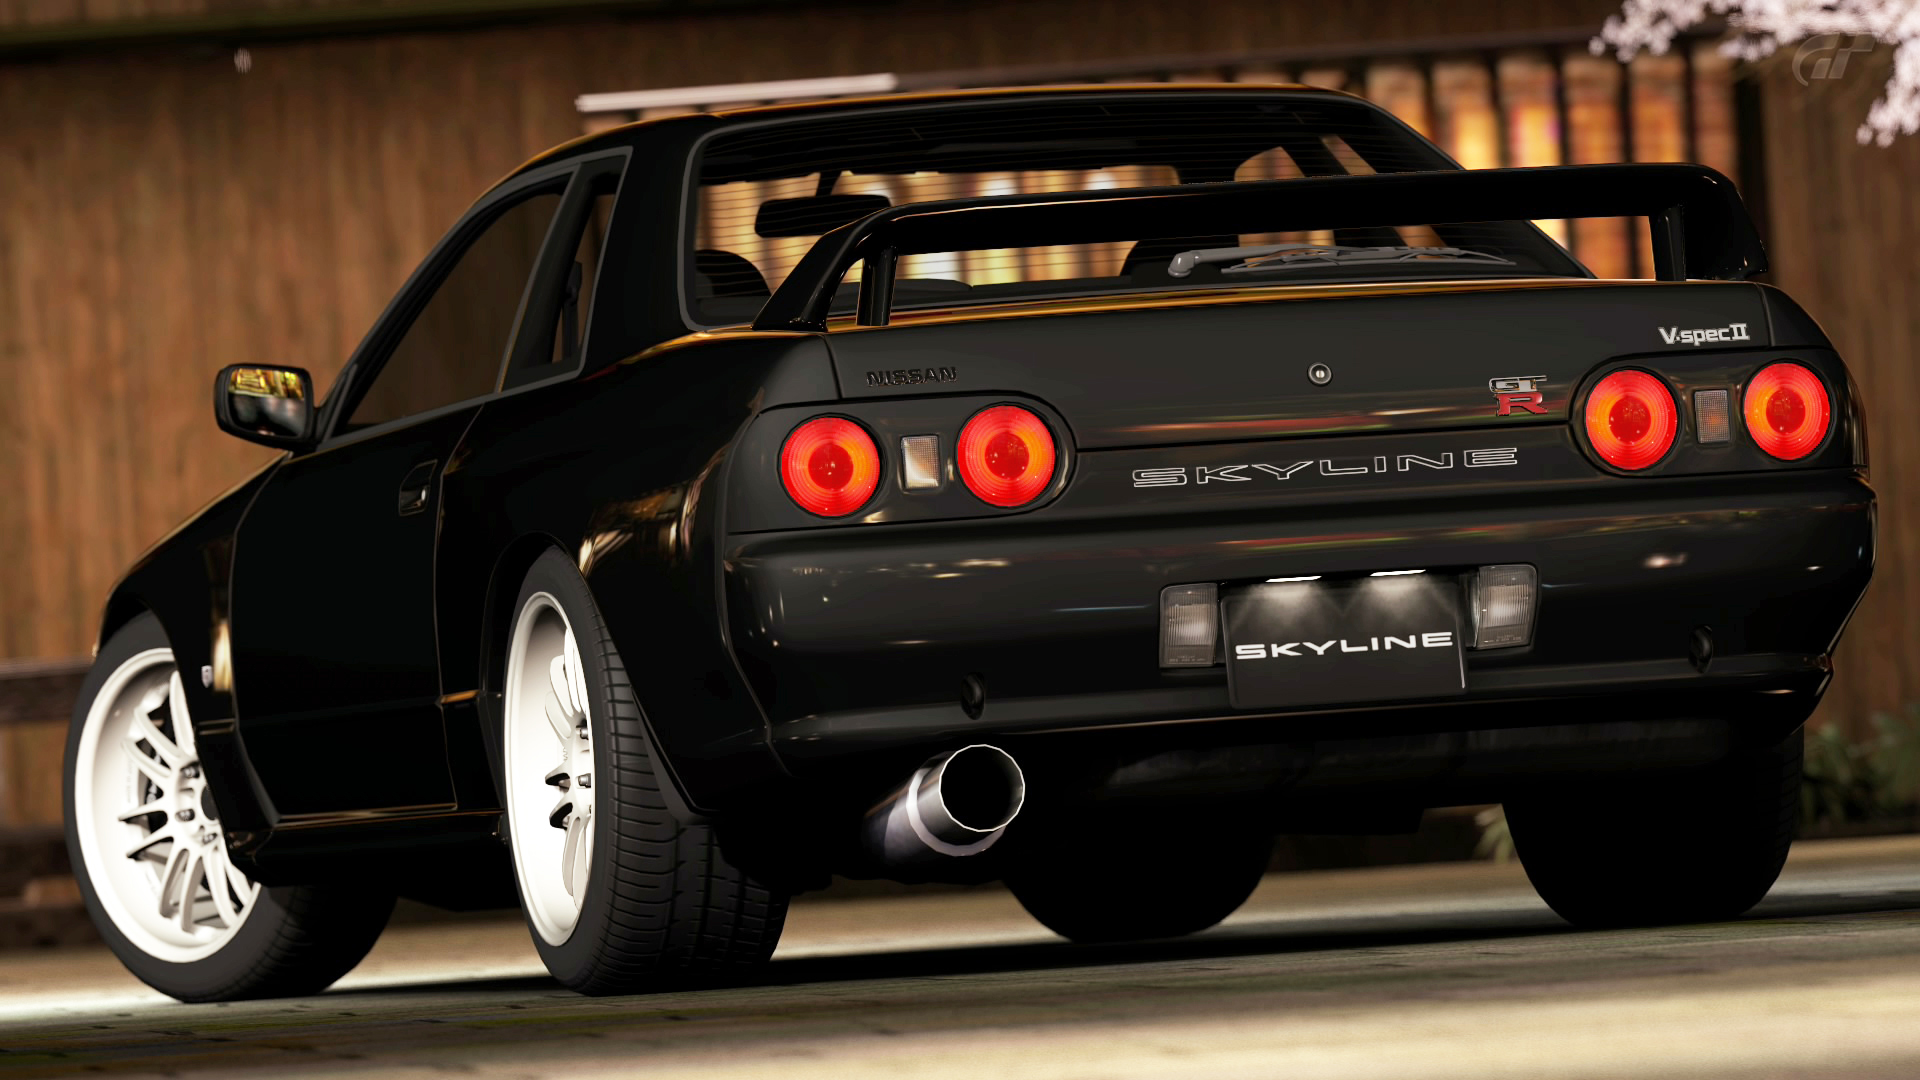 Nissan Skyline Gt R R32 V Spec Ii Gt5 By Vertualissimo On